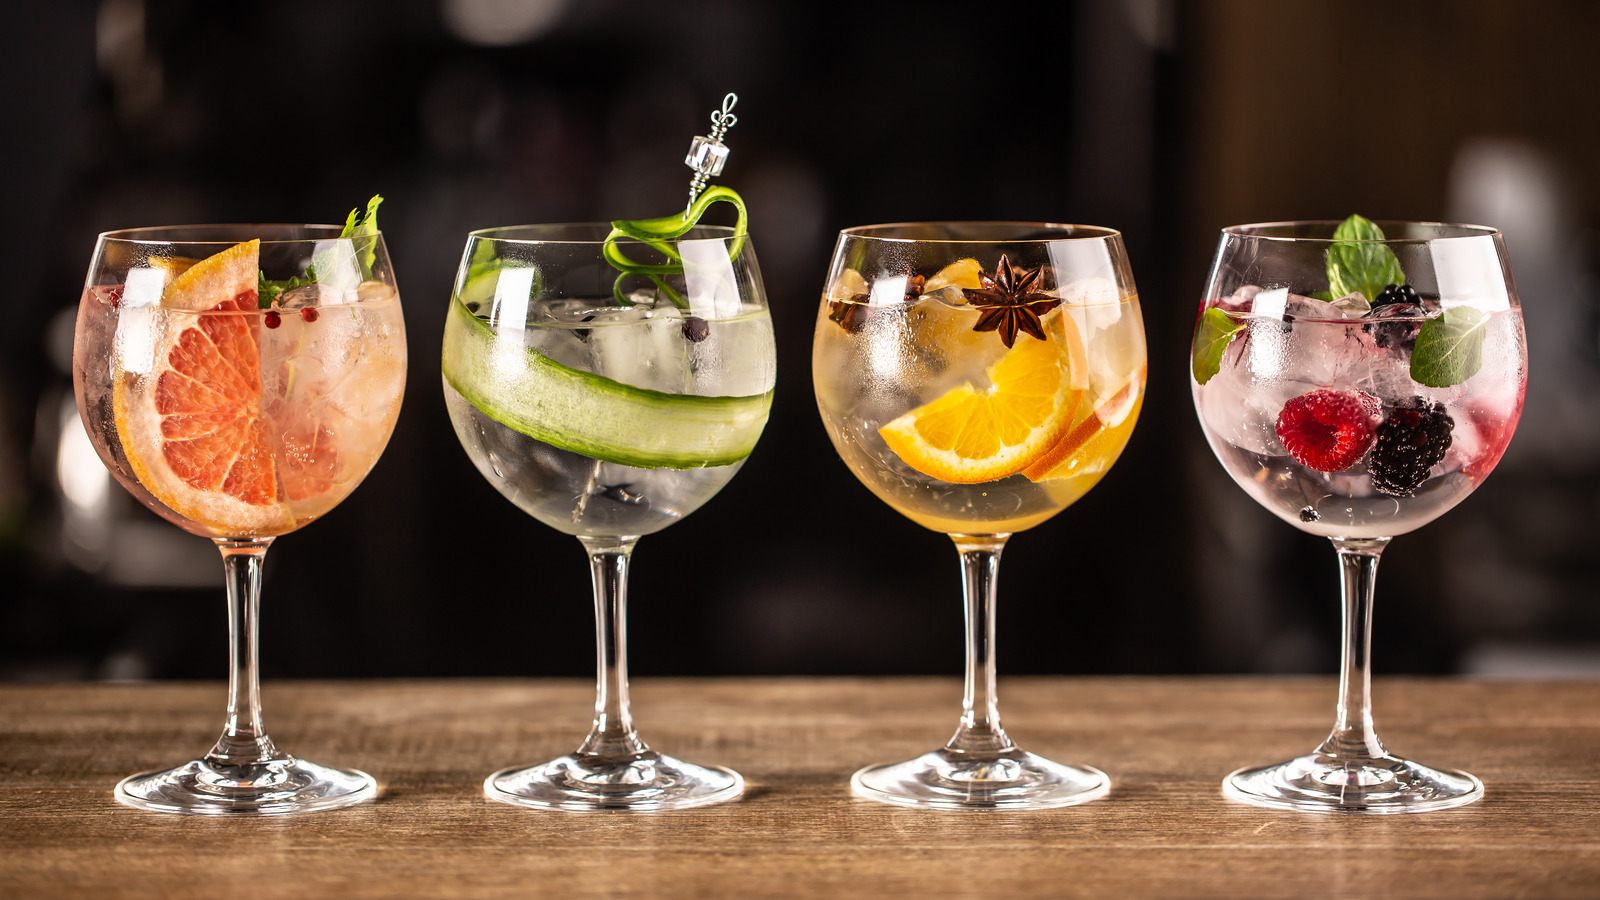 Gordon'S Pink Gin And Fever-Tree Tonic Recipe